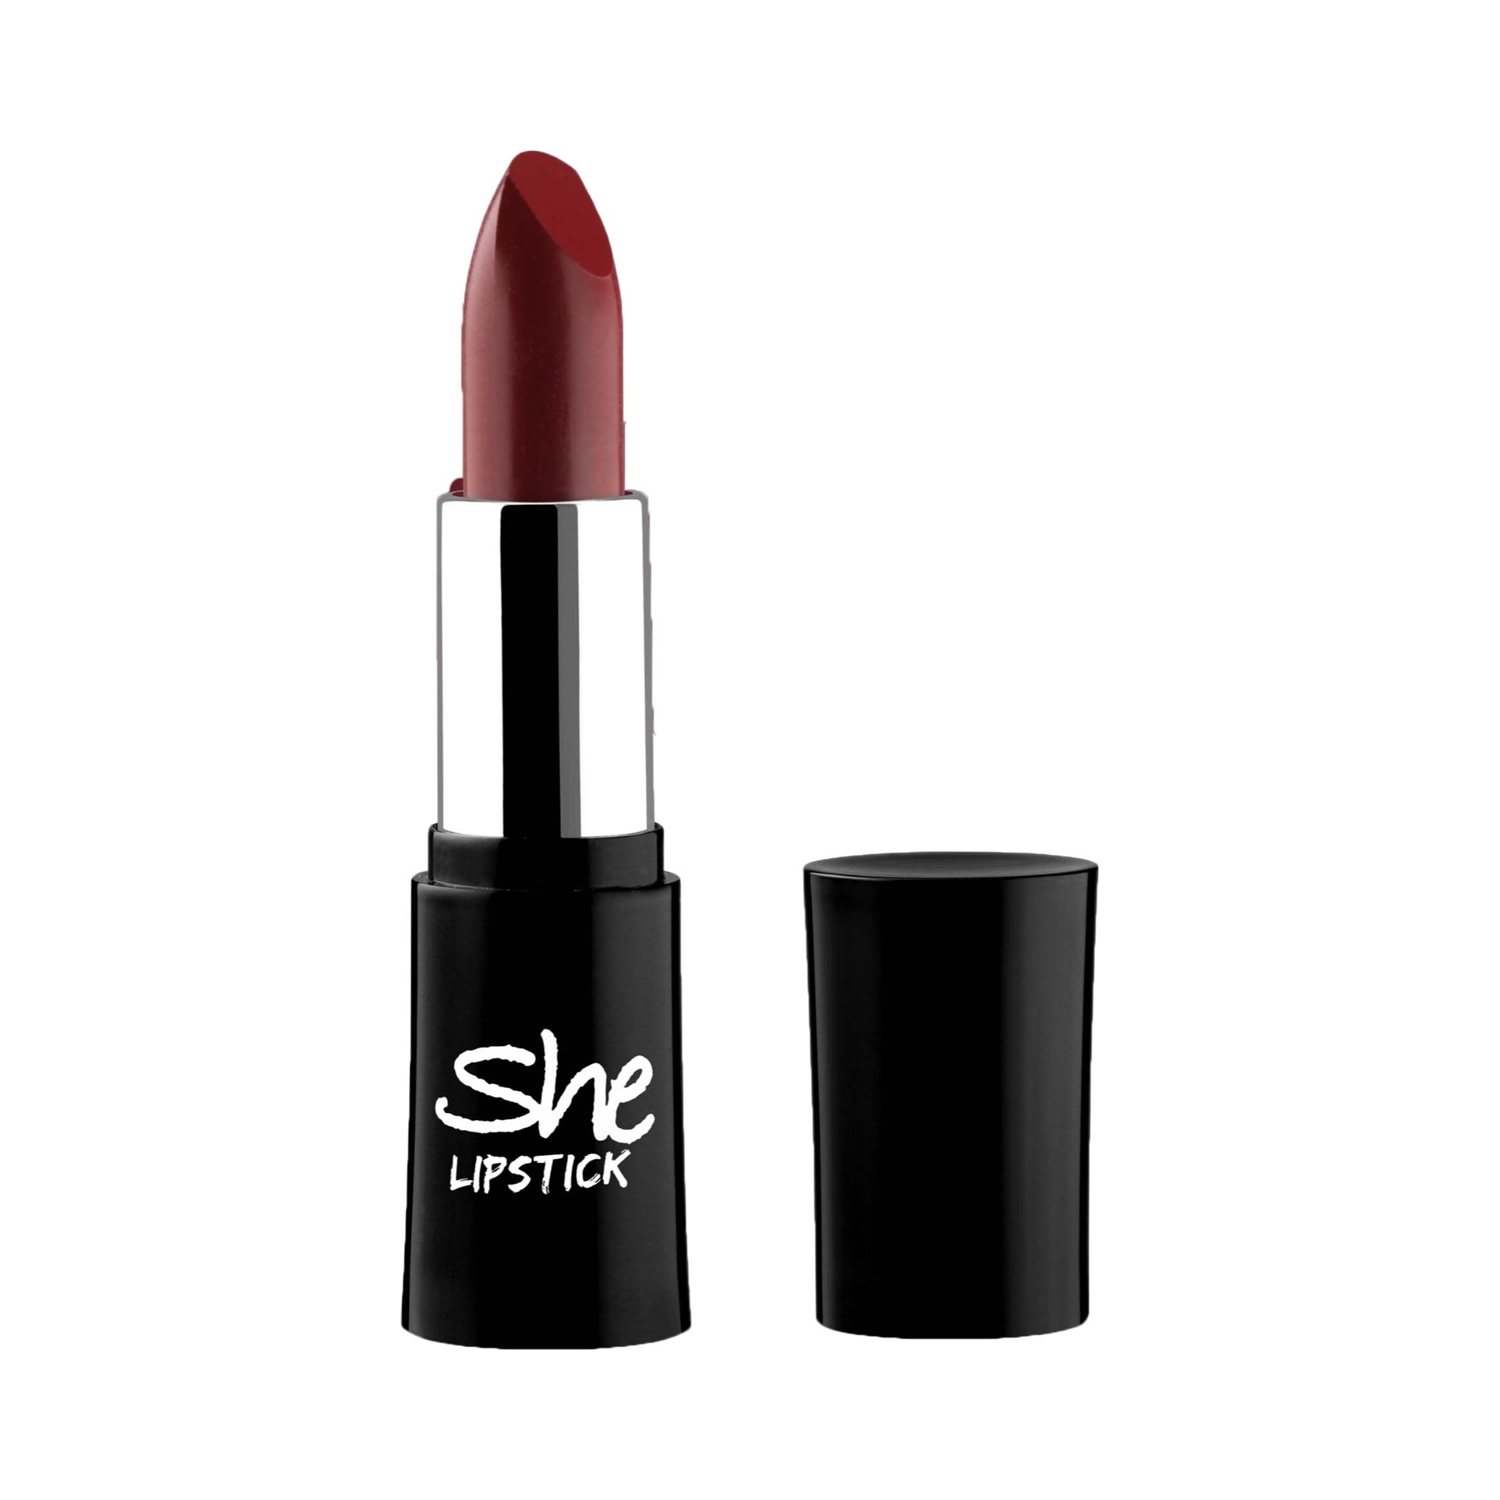 She | She Makeup Lipstick - 10 Roasted Brown (4.5g)